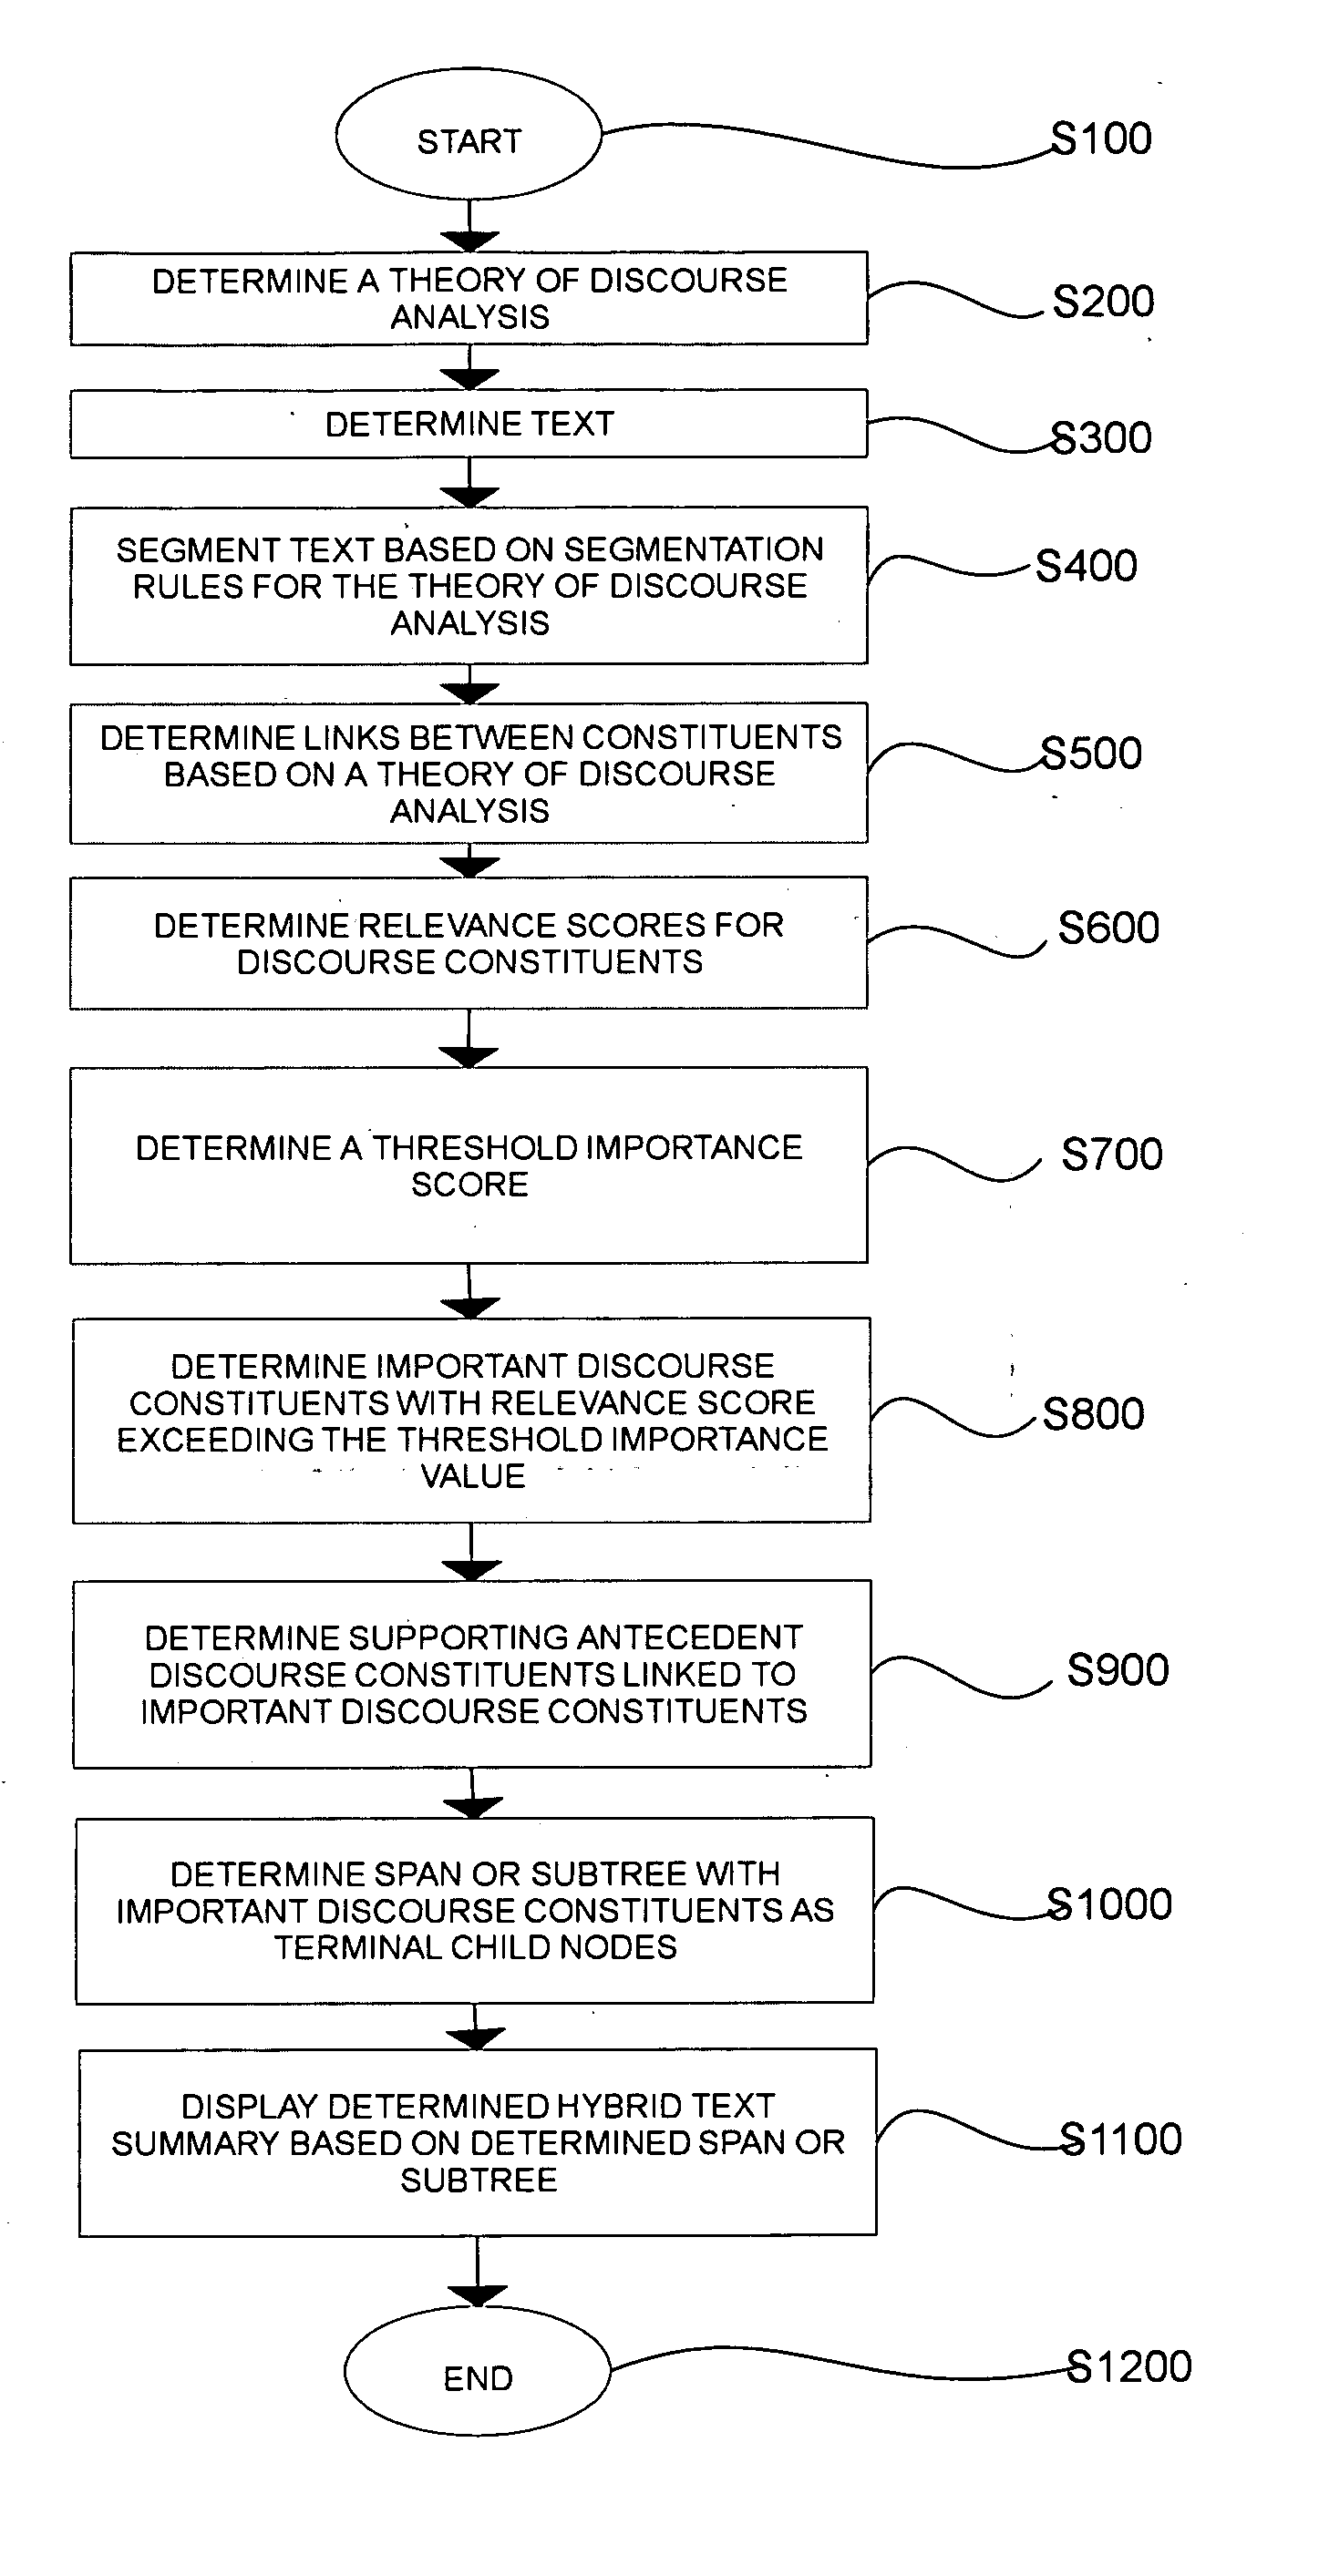 Systems and methods for hybrid text summarization